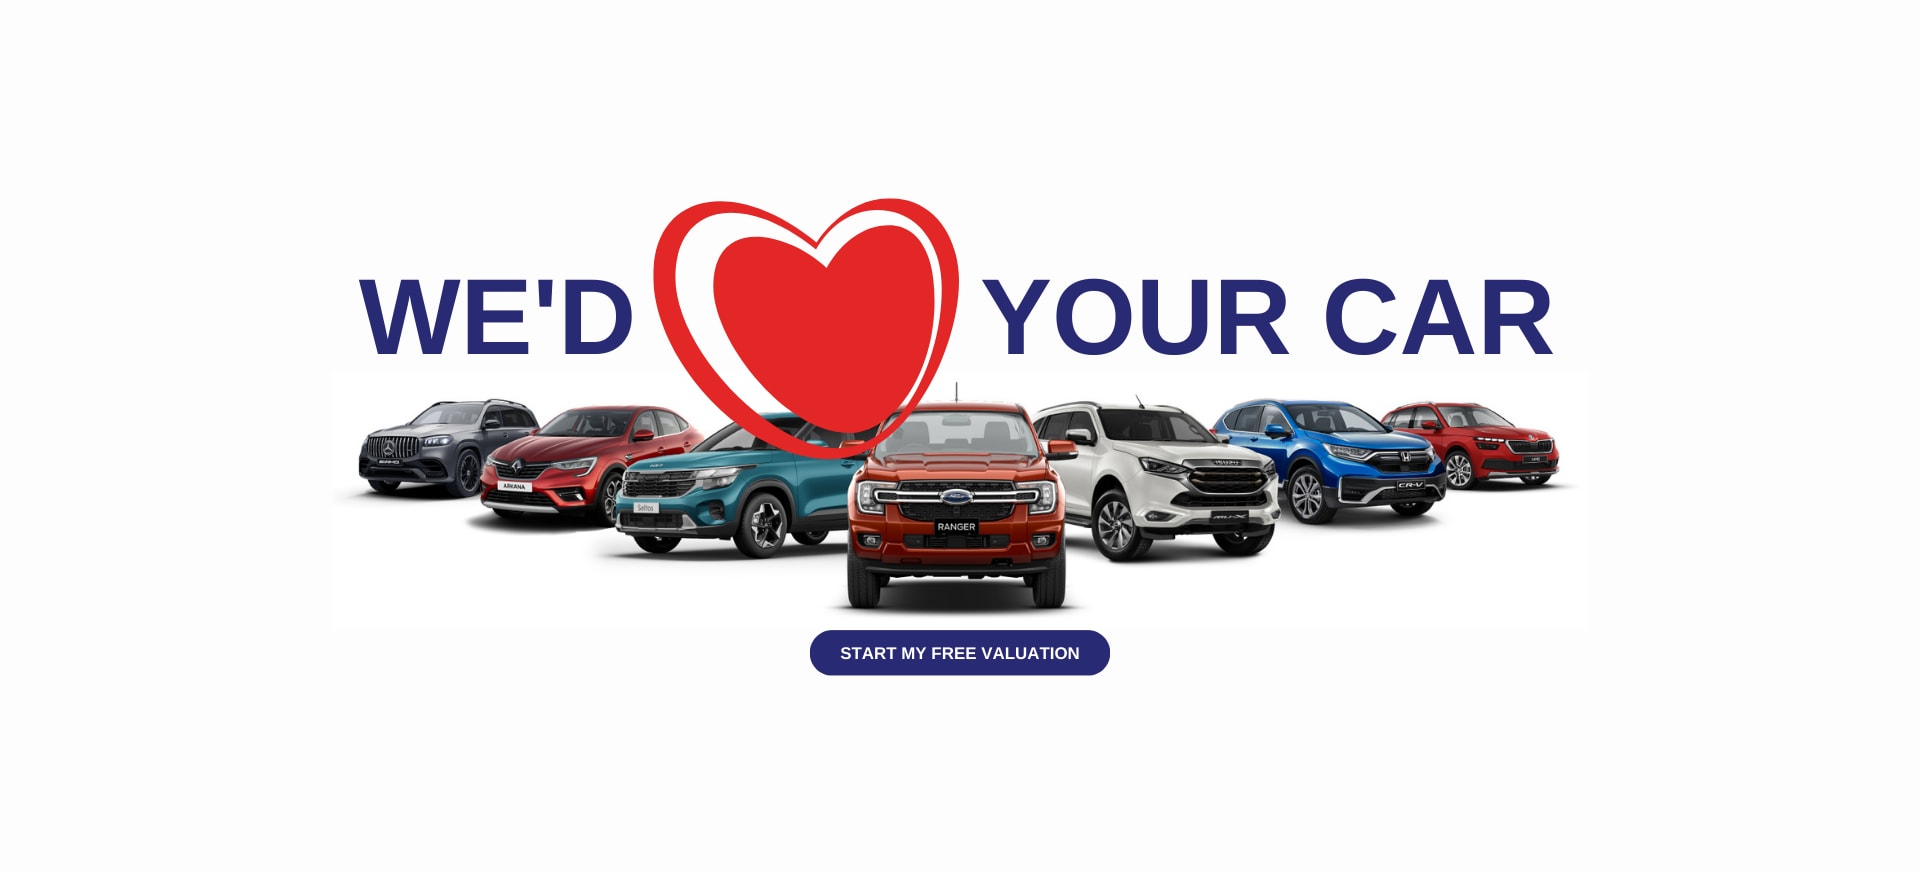 We'd Love Your Car | Valuation